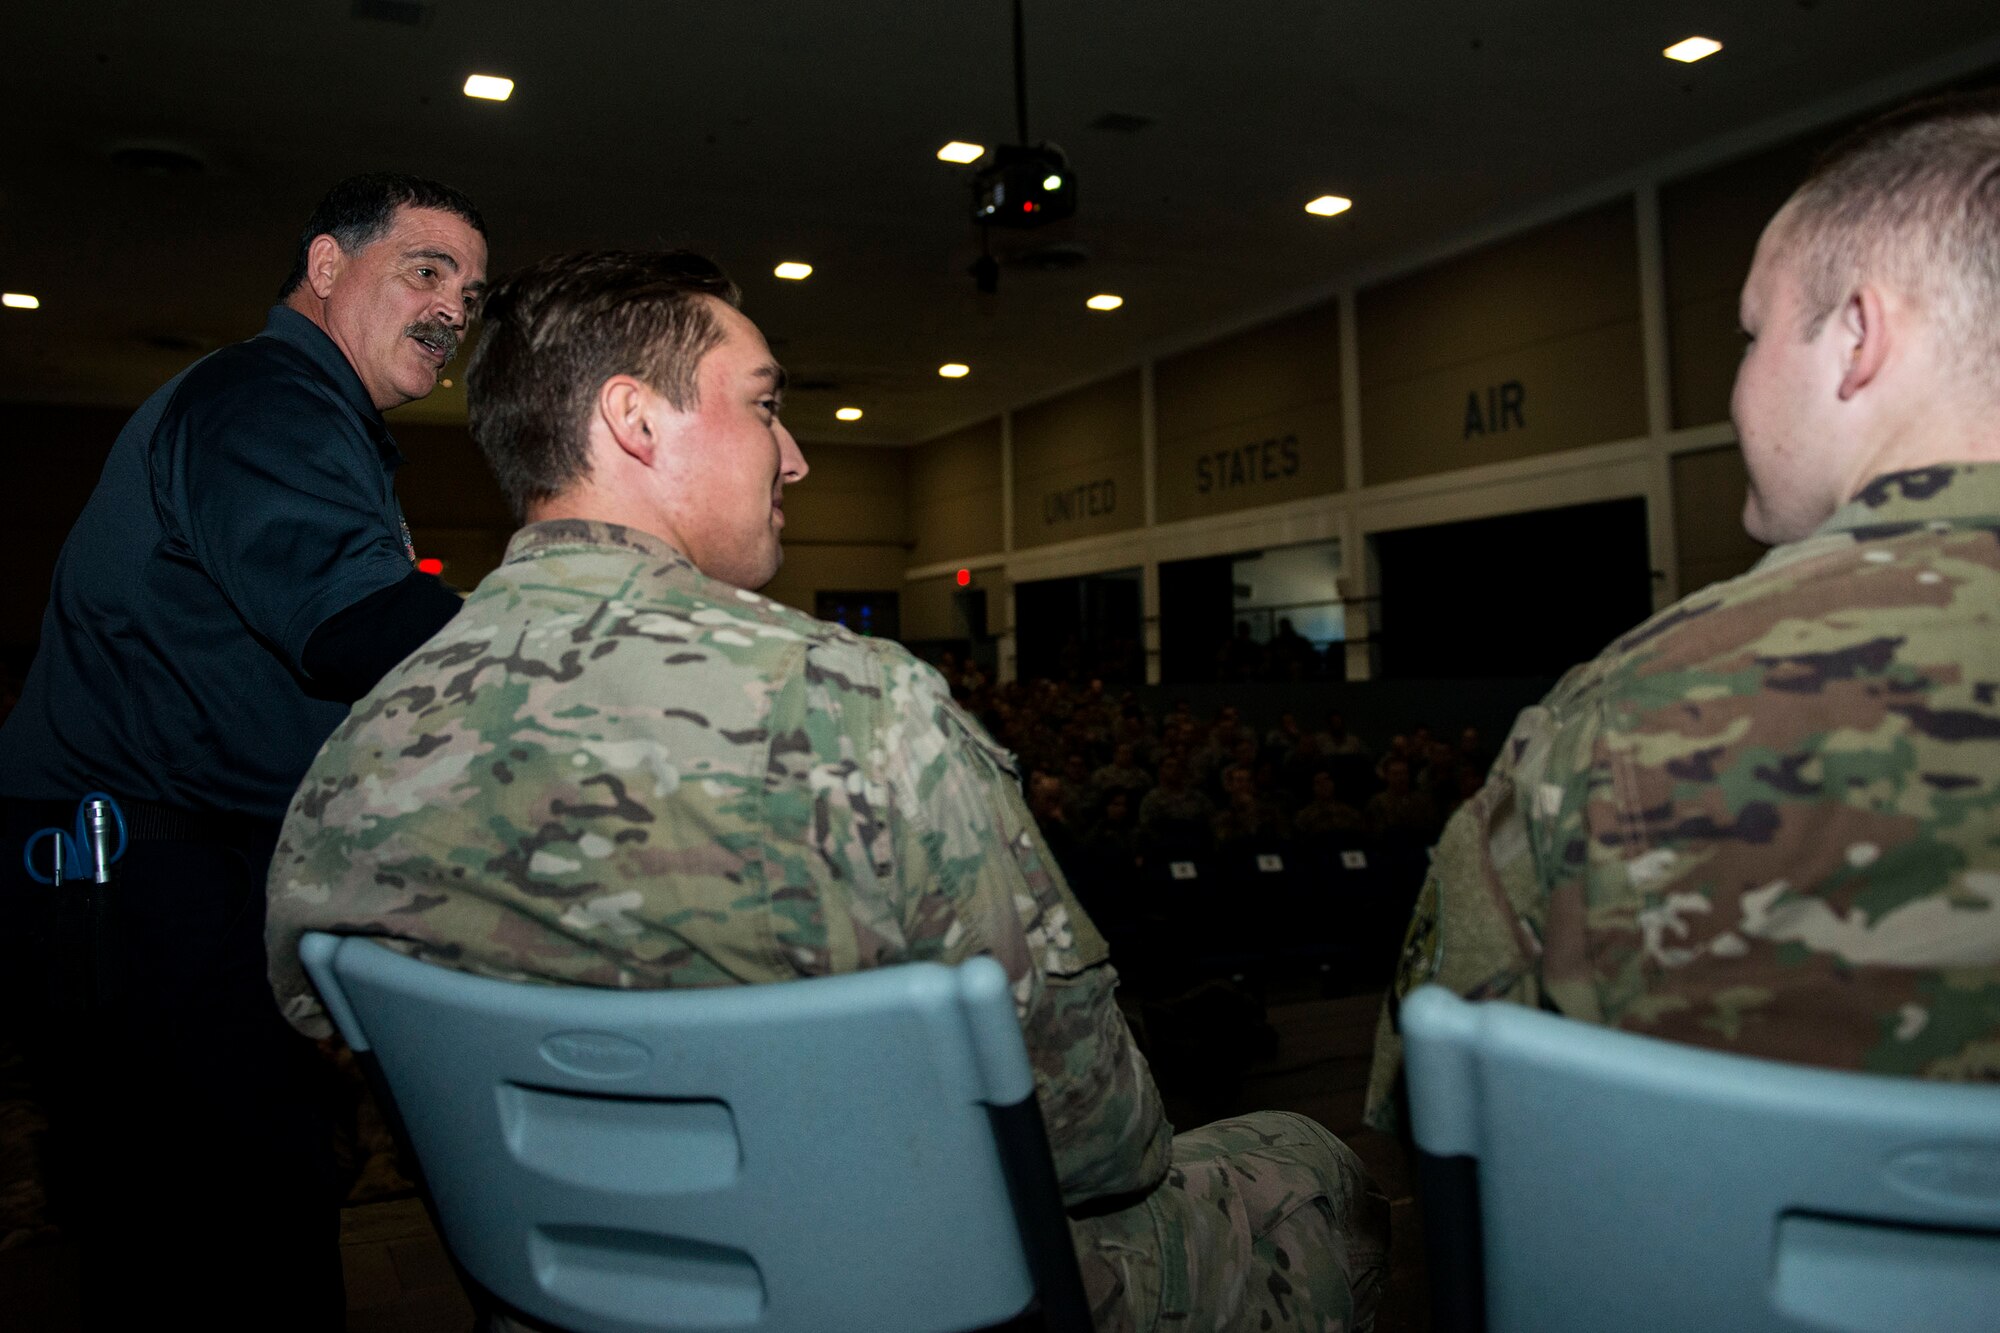 Ronny Garcia, left, safety training coordinator, discusses driving safety with Senior Airman Cody Stoltenburg, middle, 71st Rescue Squadron intelligence analyst, and Airman 1st Class Tyler Amrine, 347th Operation Support Squadron intelligence analyst, during a Street Smart presentation, Jan. 2, 2018, at Moody Air Force Base, Ga. The presenters utilized Airmen to simulate the potential results of drunk driving. Street Smart is a safety program designed to emphasize the dangers of making poor decisions and then driving a vehicle. (U.S. Air Force photo by Airman 1st Class Erick Requadt)